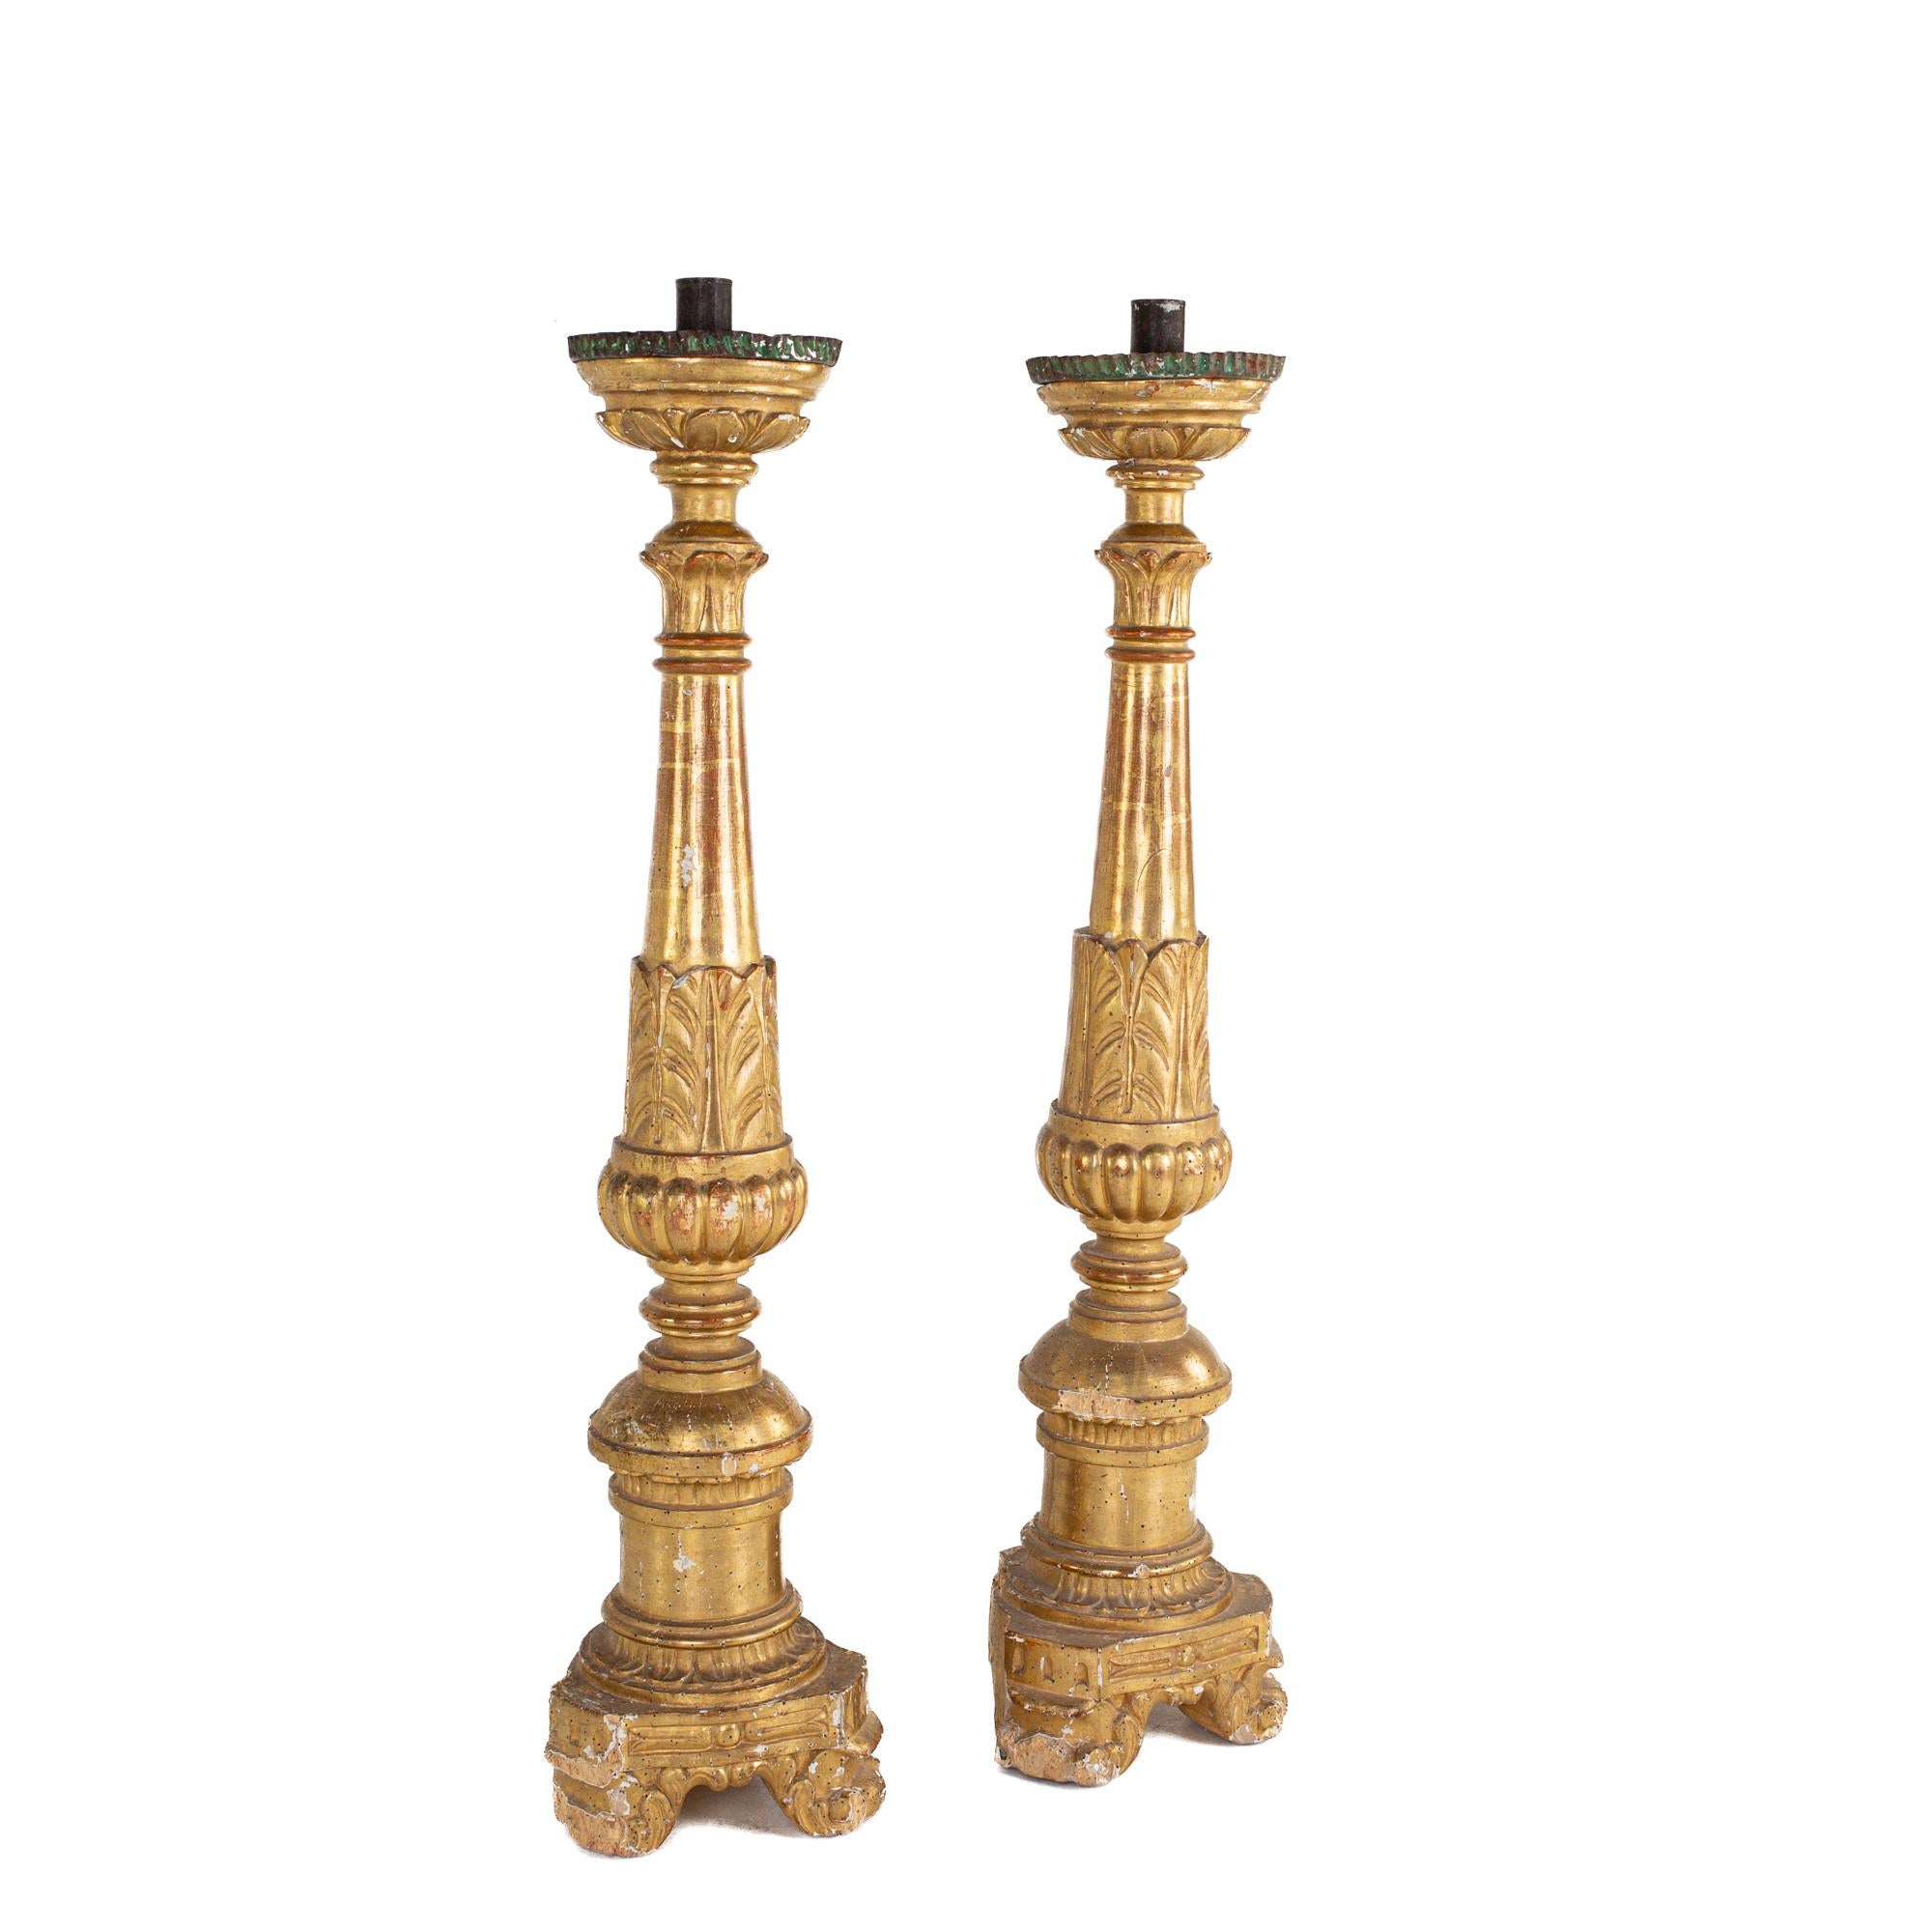 Superb Pair of Finely Carved French Candlesticks

Each candlestick measures: 8 wide x 8 deep x 36 inches high

This set is in Great Vintage Condition with minor marks, dents, and wear.

We take our photos in a controlled lighting studio to